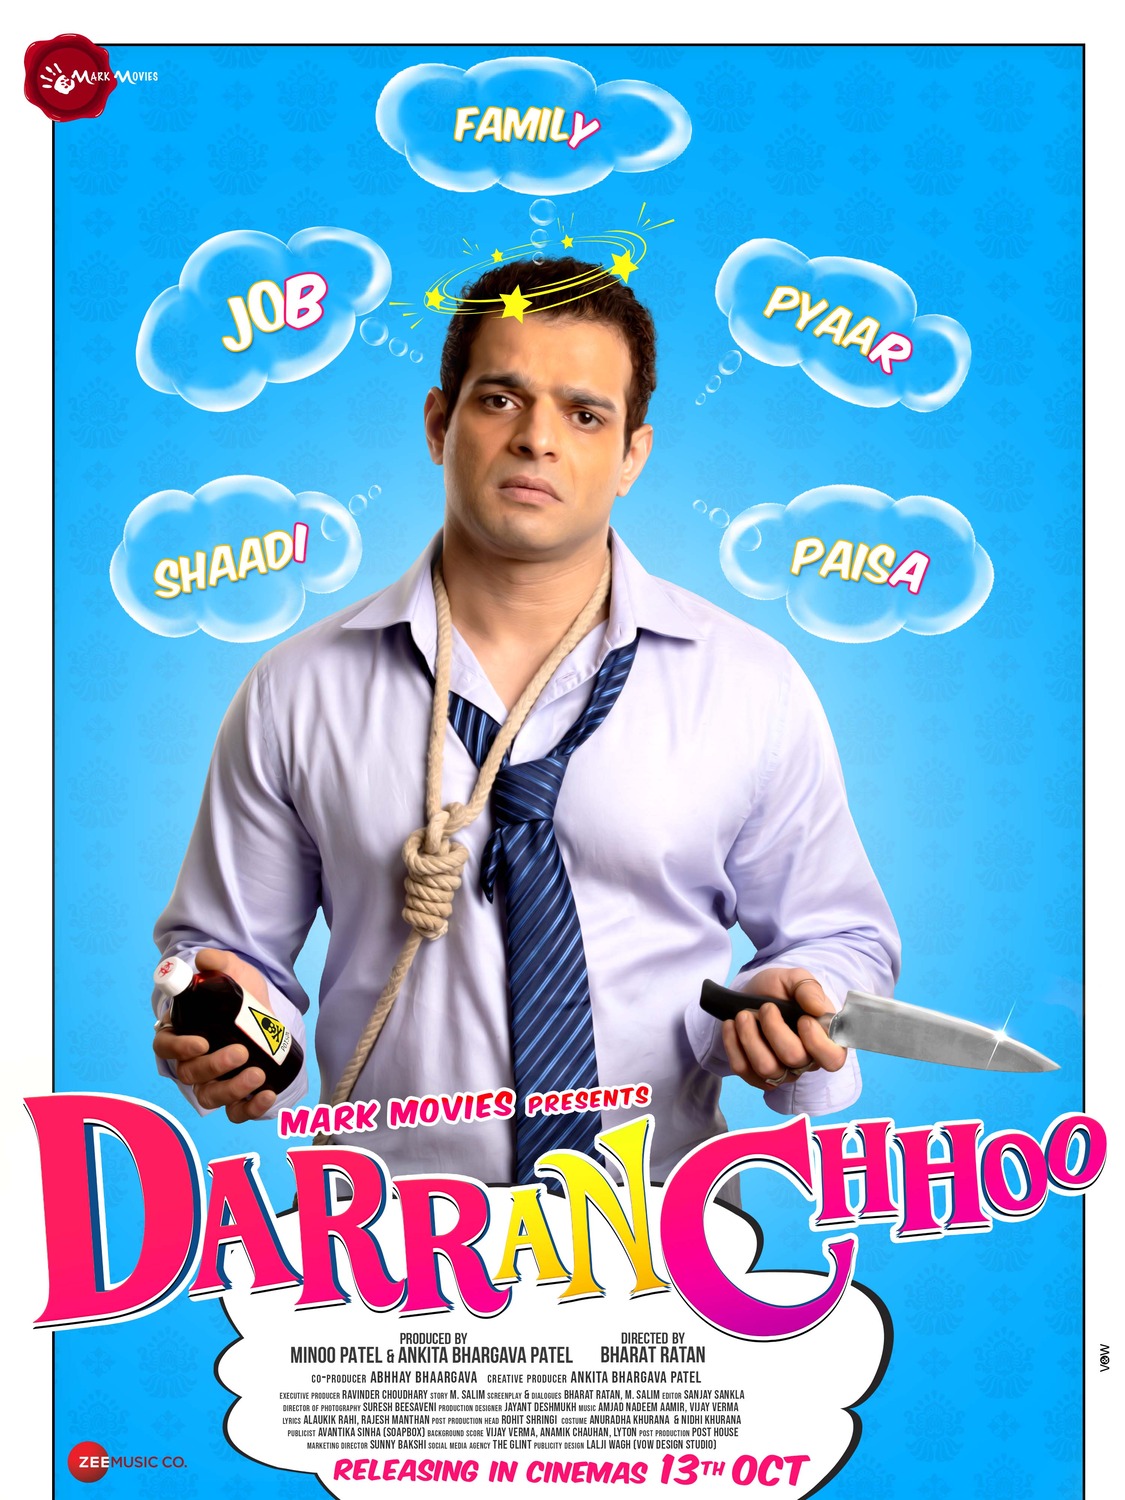 Extra Large Movie Poster Image for Darran Chhoo (#2 of 4)